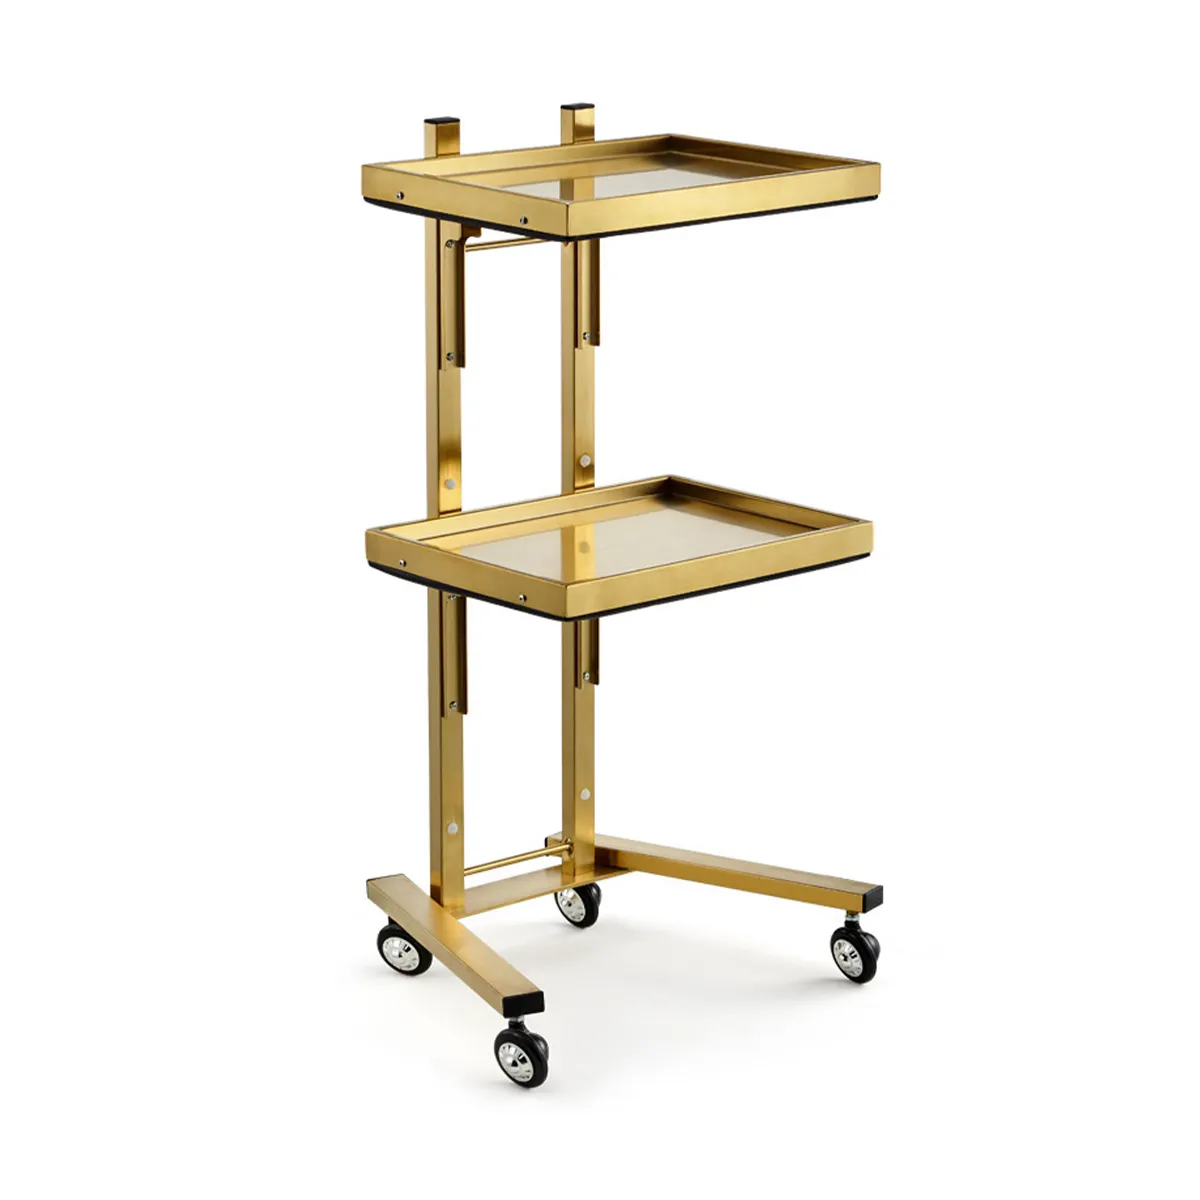 A&C Mobile Beauty Hairdressing Machine Hair Salon Trolley